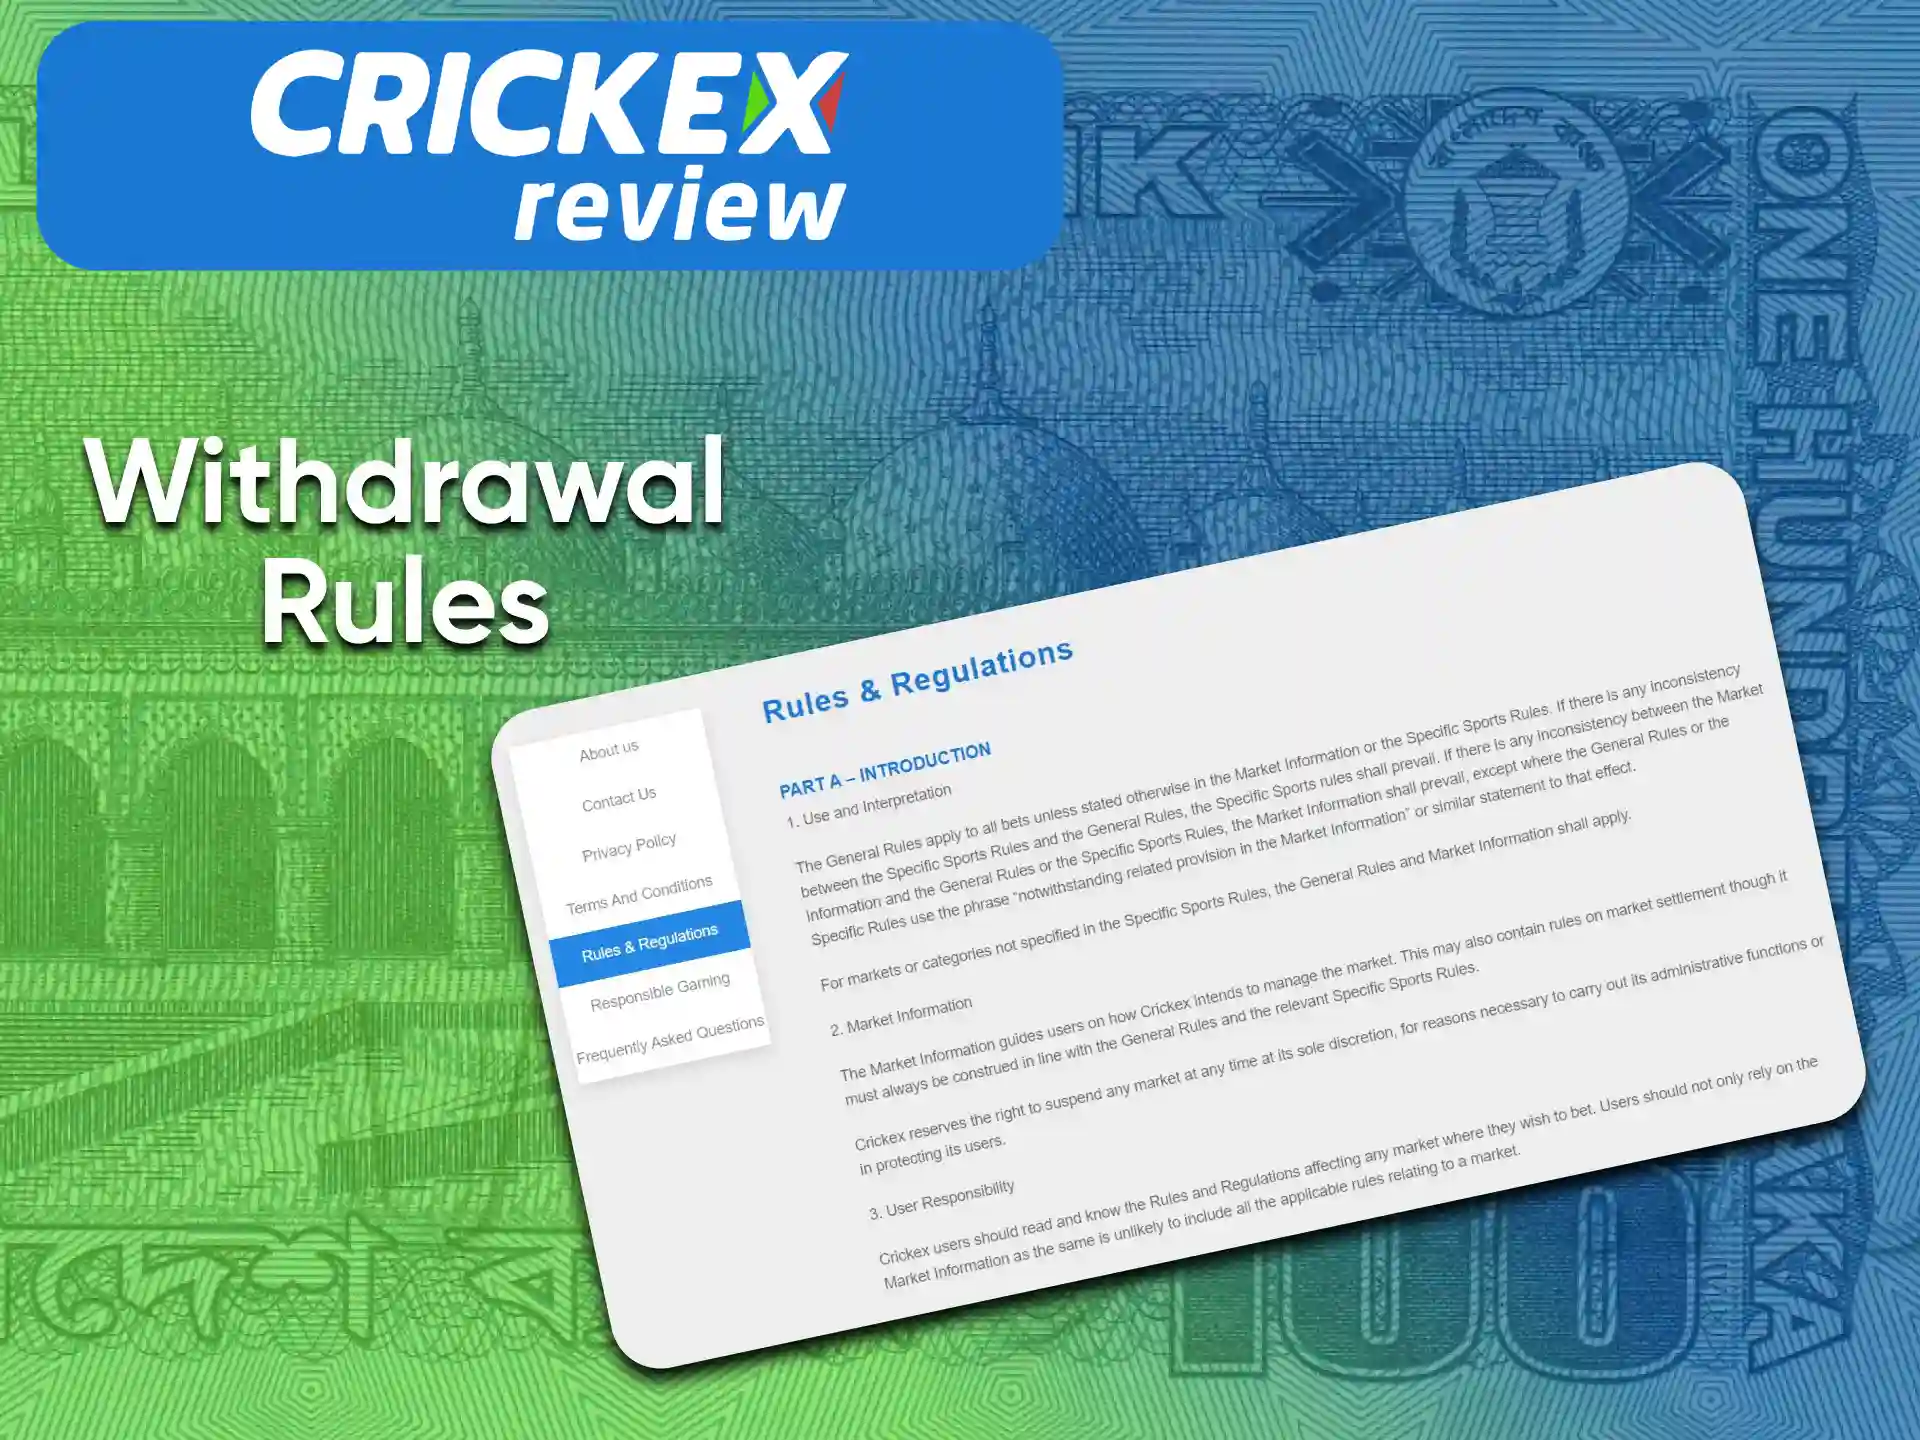 Follow the necessary conditions for withdrawing funds from Crickex.